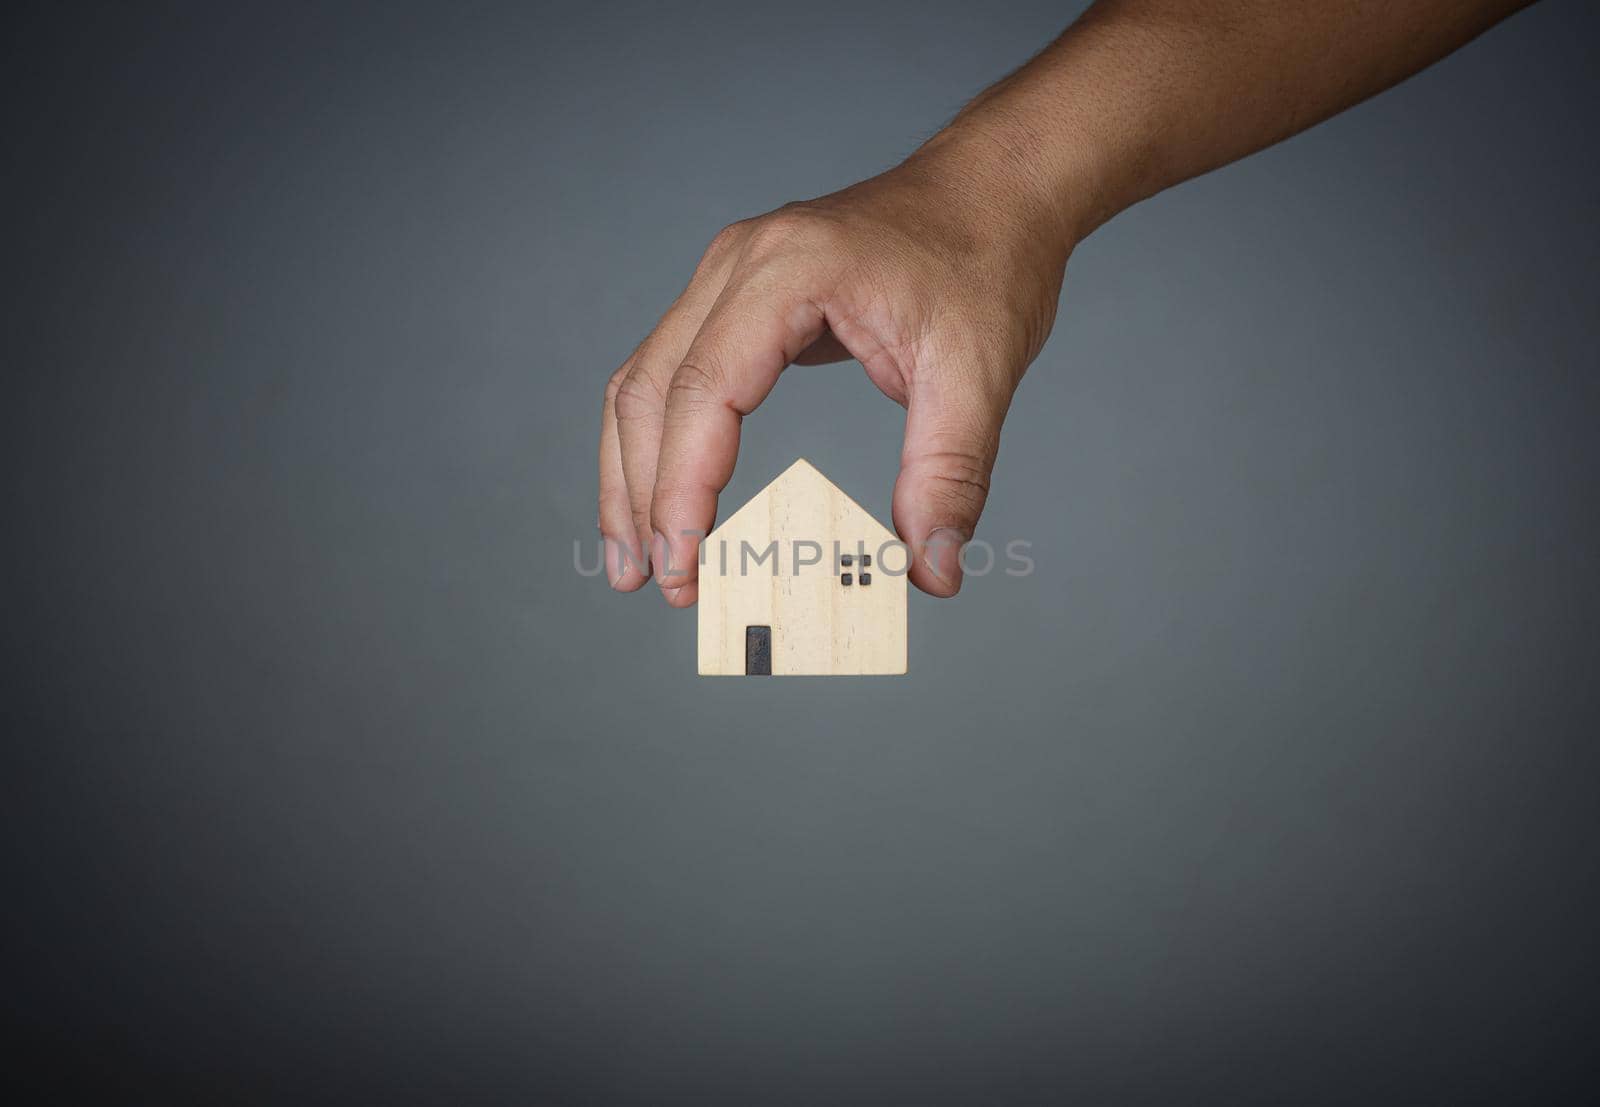 Concept of selling a house. A hand is holding a model house on a gray background. Real estate agent offer house, property insurance and security, affordable housing concepts, home insurance broker agent, salesman person. by Unimages2527